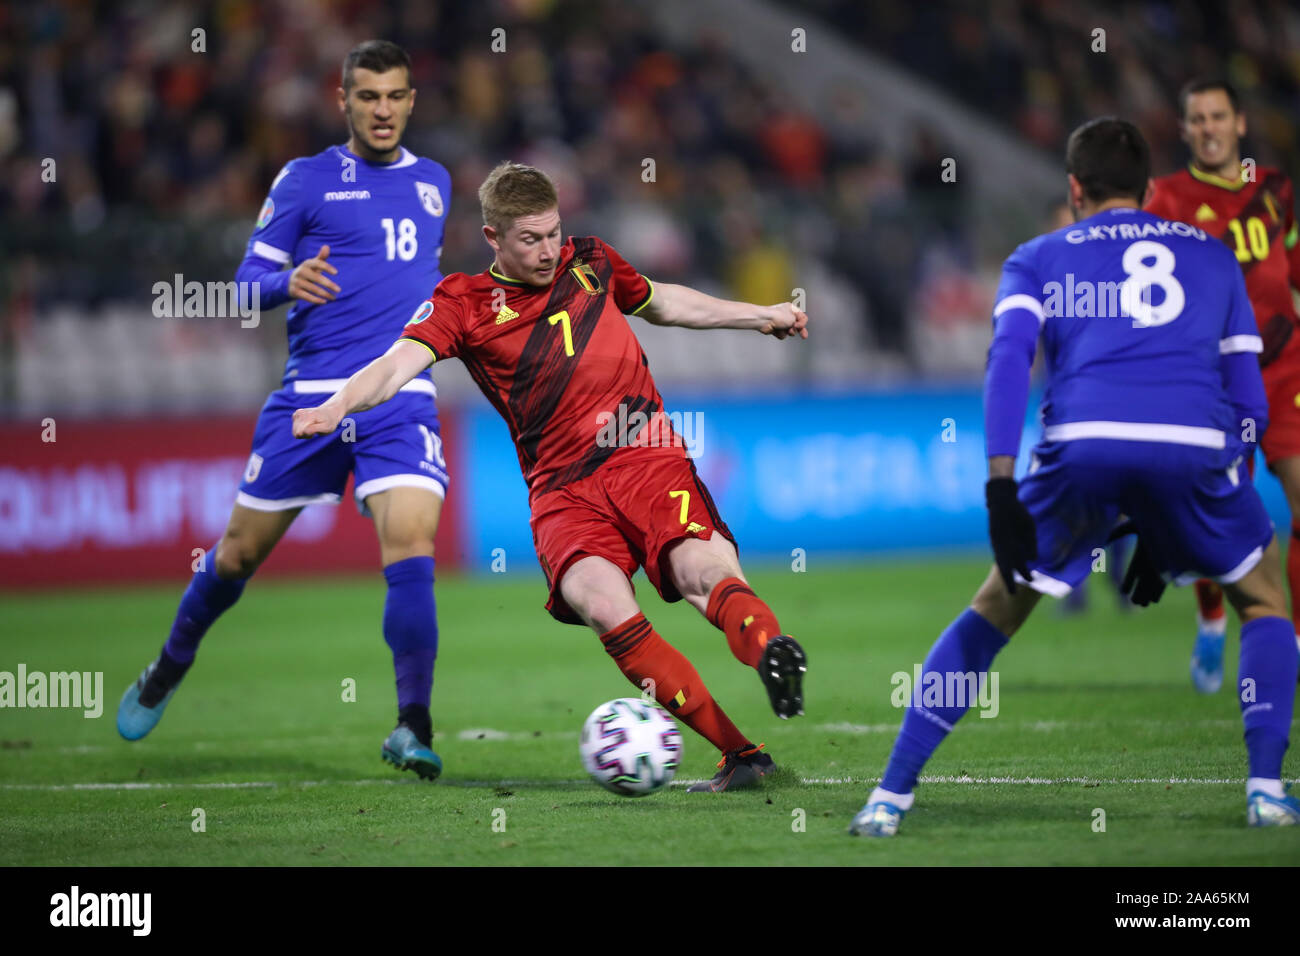 Brussels, Belgium. 19th Nov, 2019. Kevin De Bruyne of Belgium (2nd L) competes during a UEFA Euro 2020 group I qualifying match between Belgium and Cyprus in Brussels, Belgium, Nov. 19, 2019. Credit: Zhang Cheng/Xinhua/Alamy Live News Stock Photo